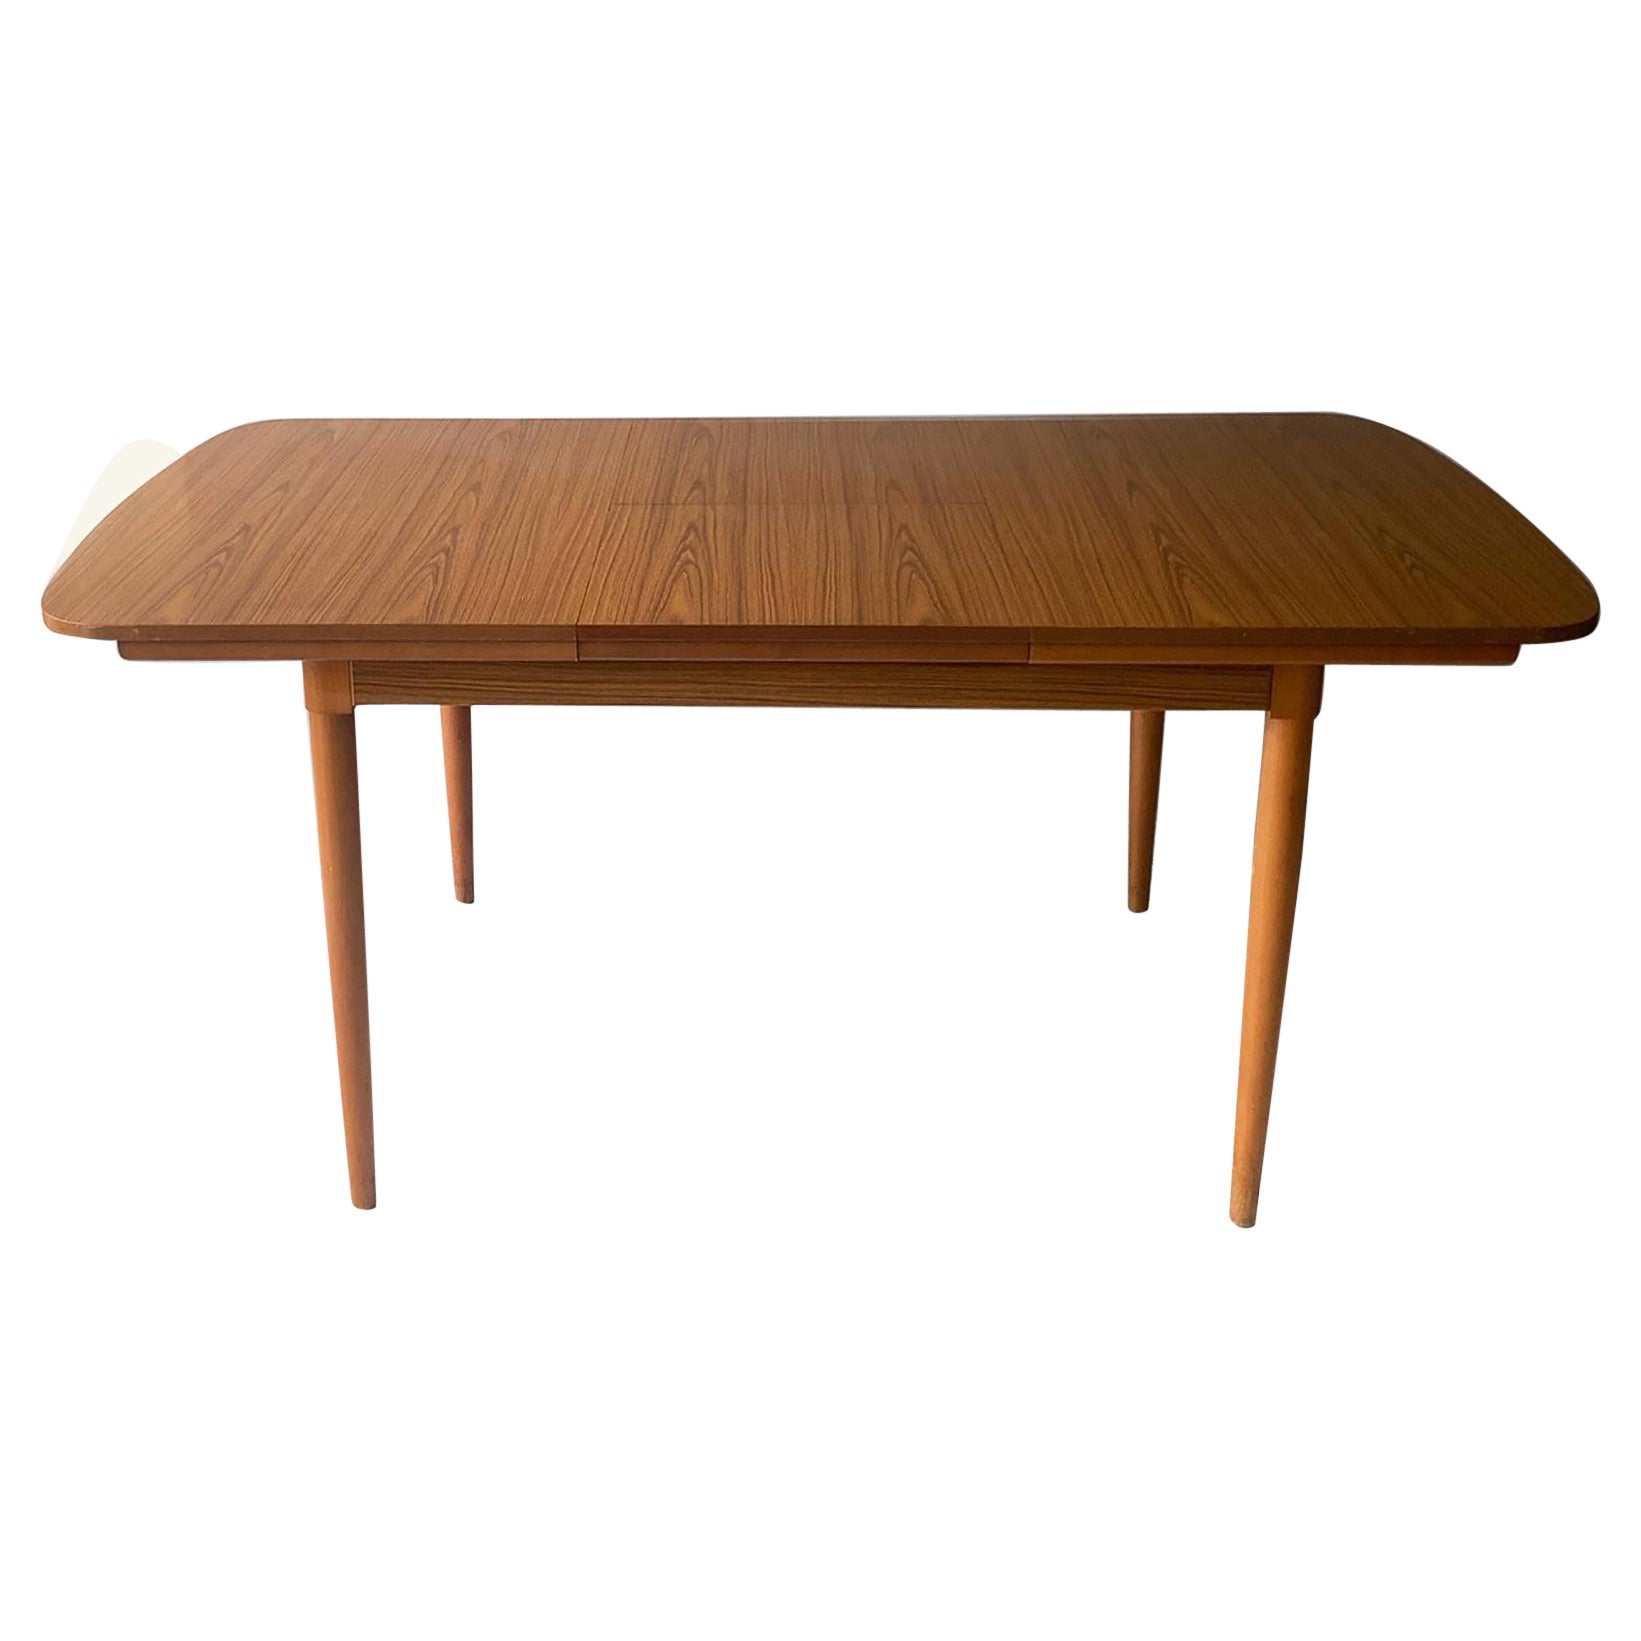 1970's mid century extending dining table by Schreiber Furniture